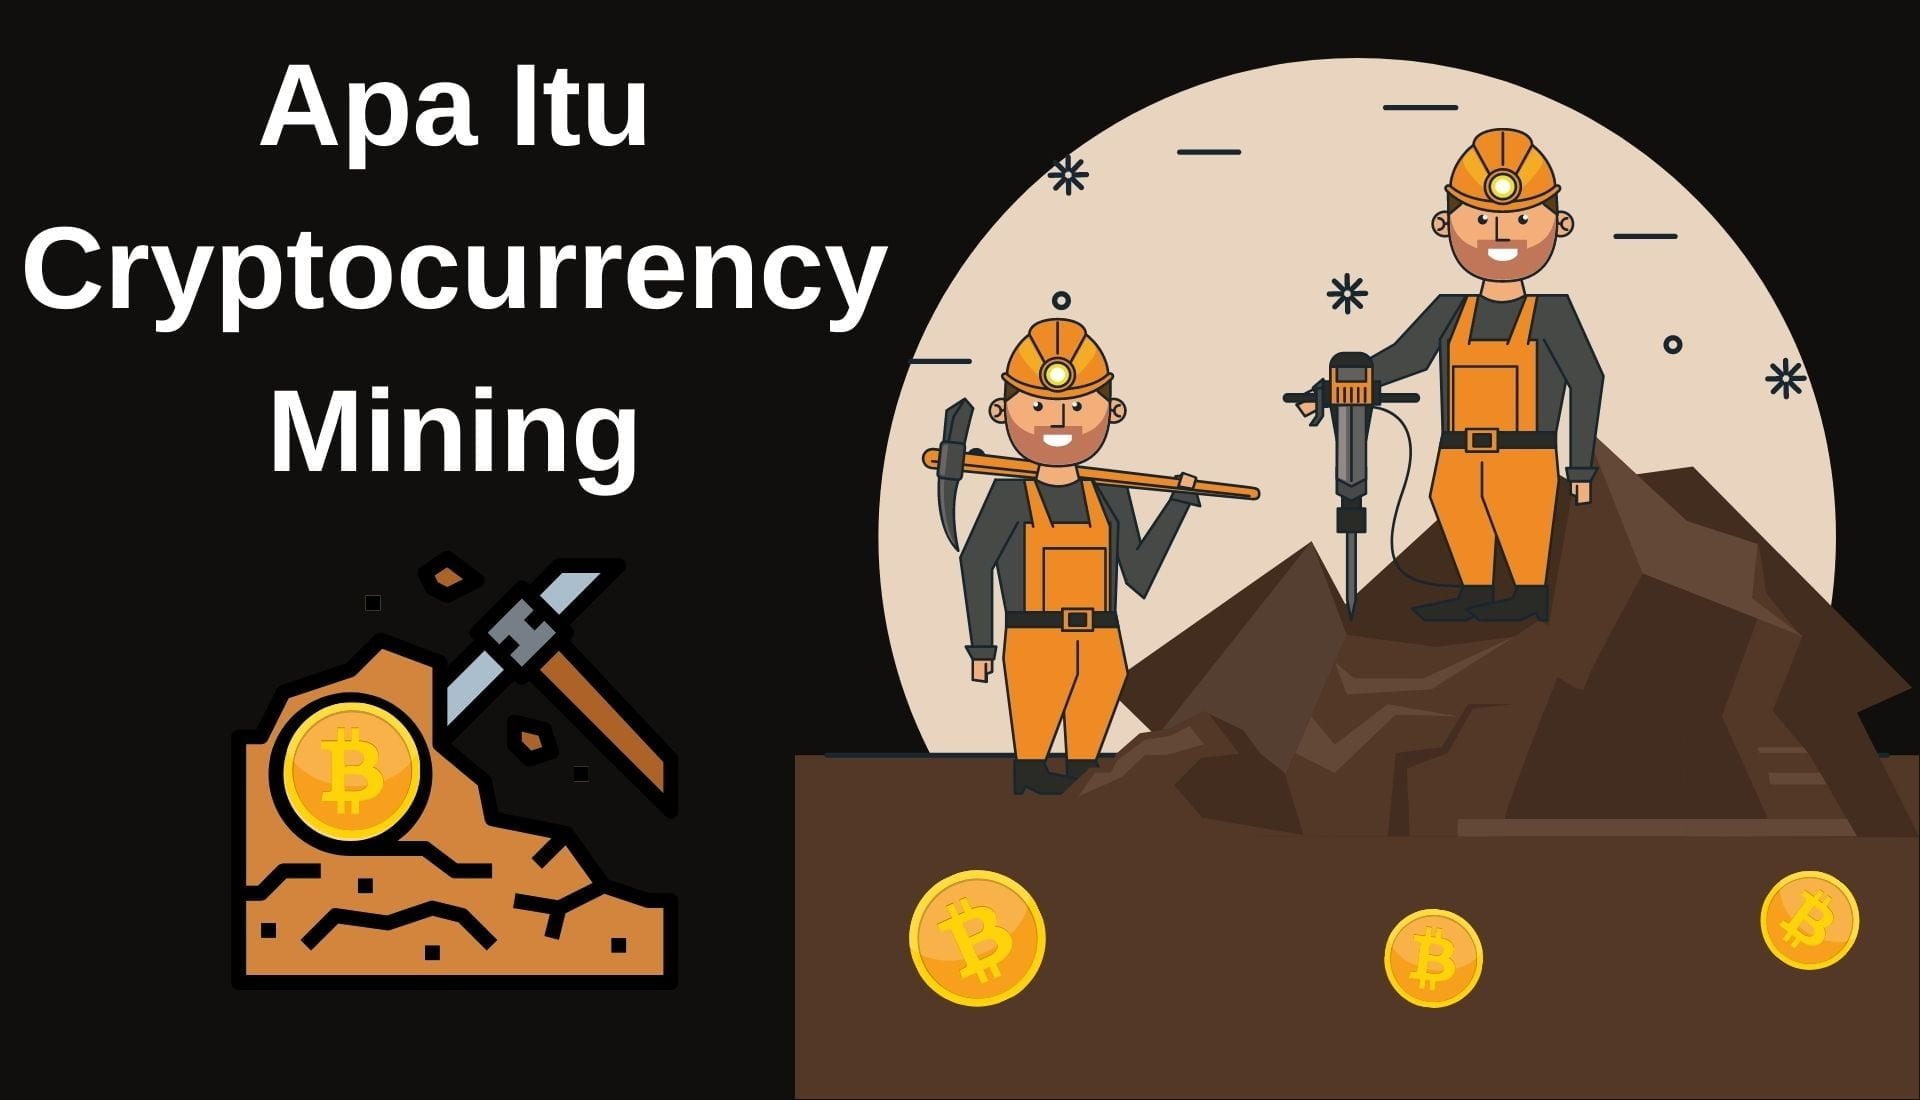 You are currently viewing Apa Itu Cryptocurrency Mining